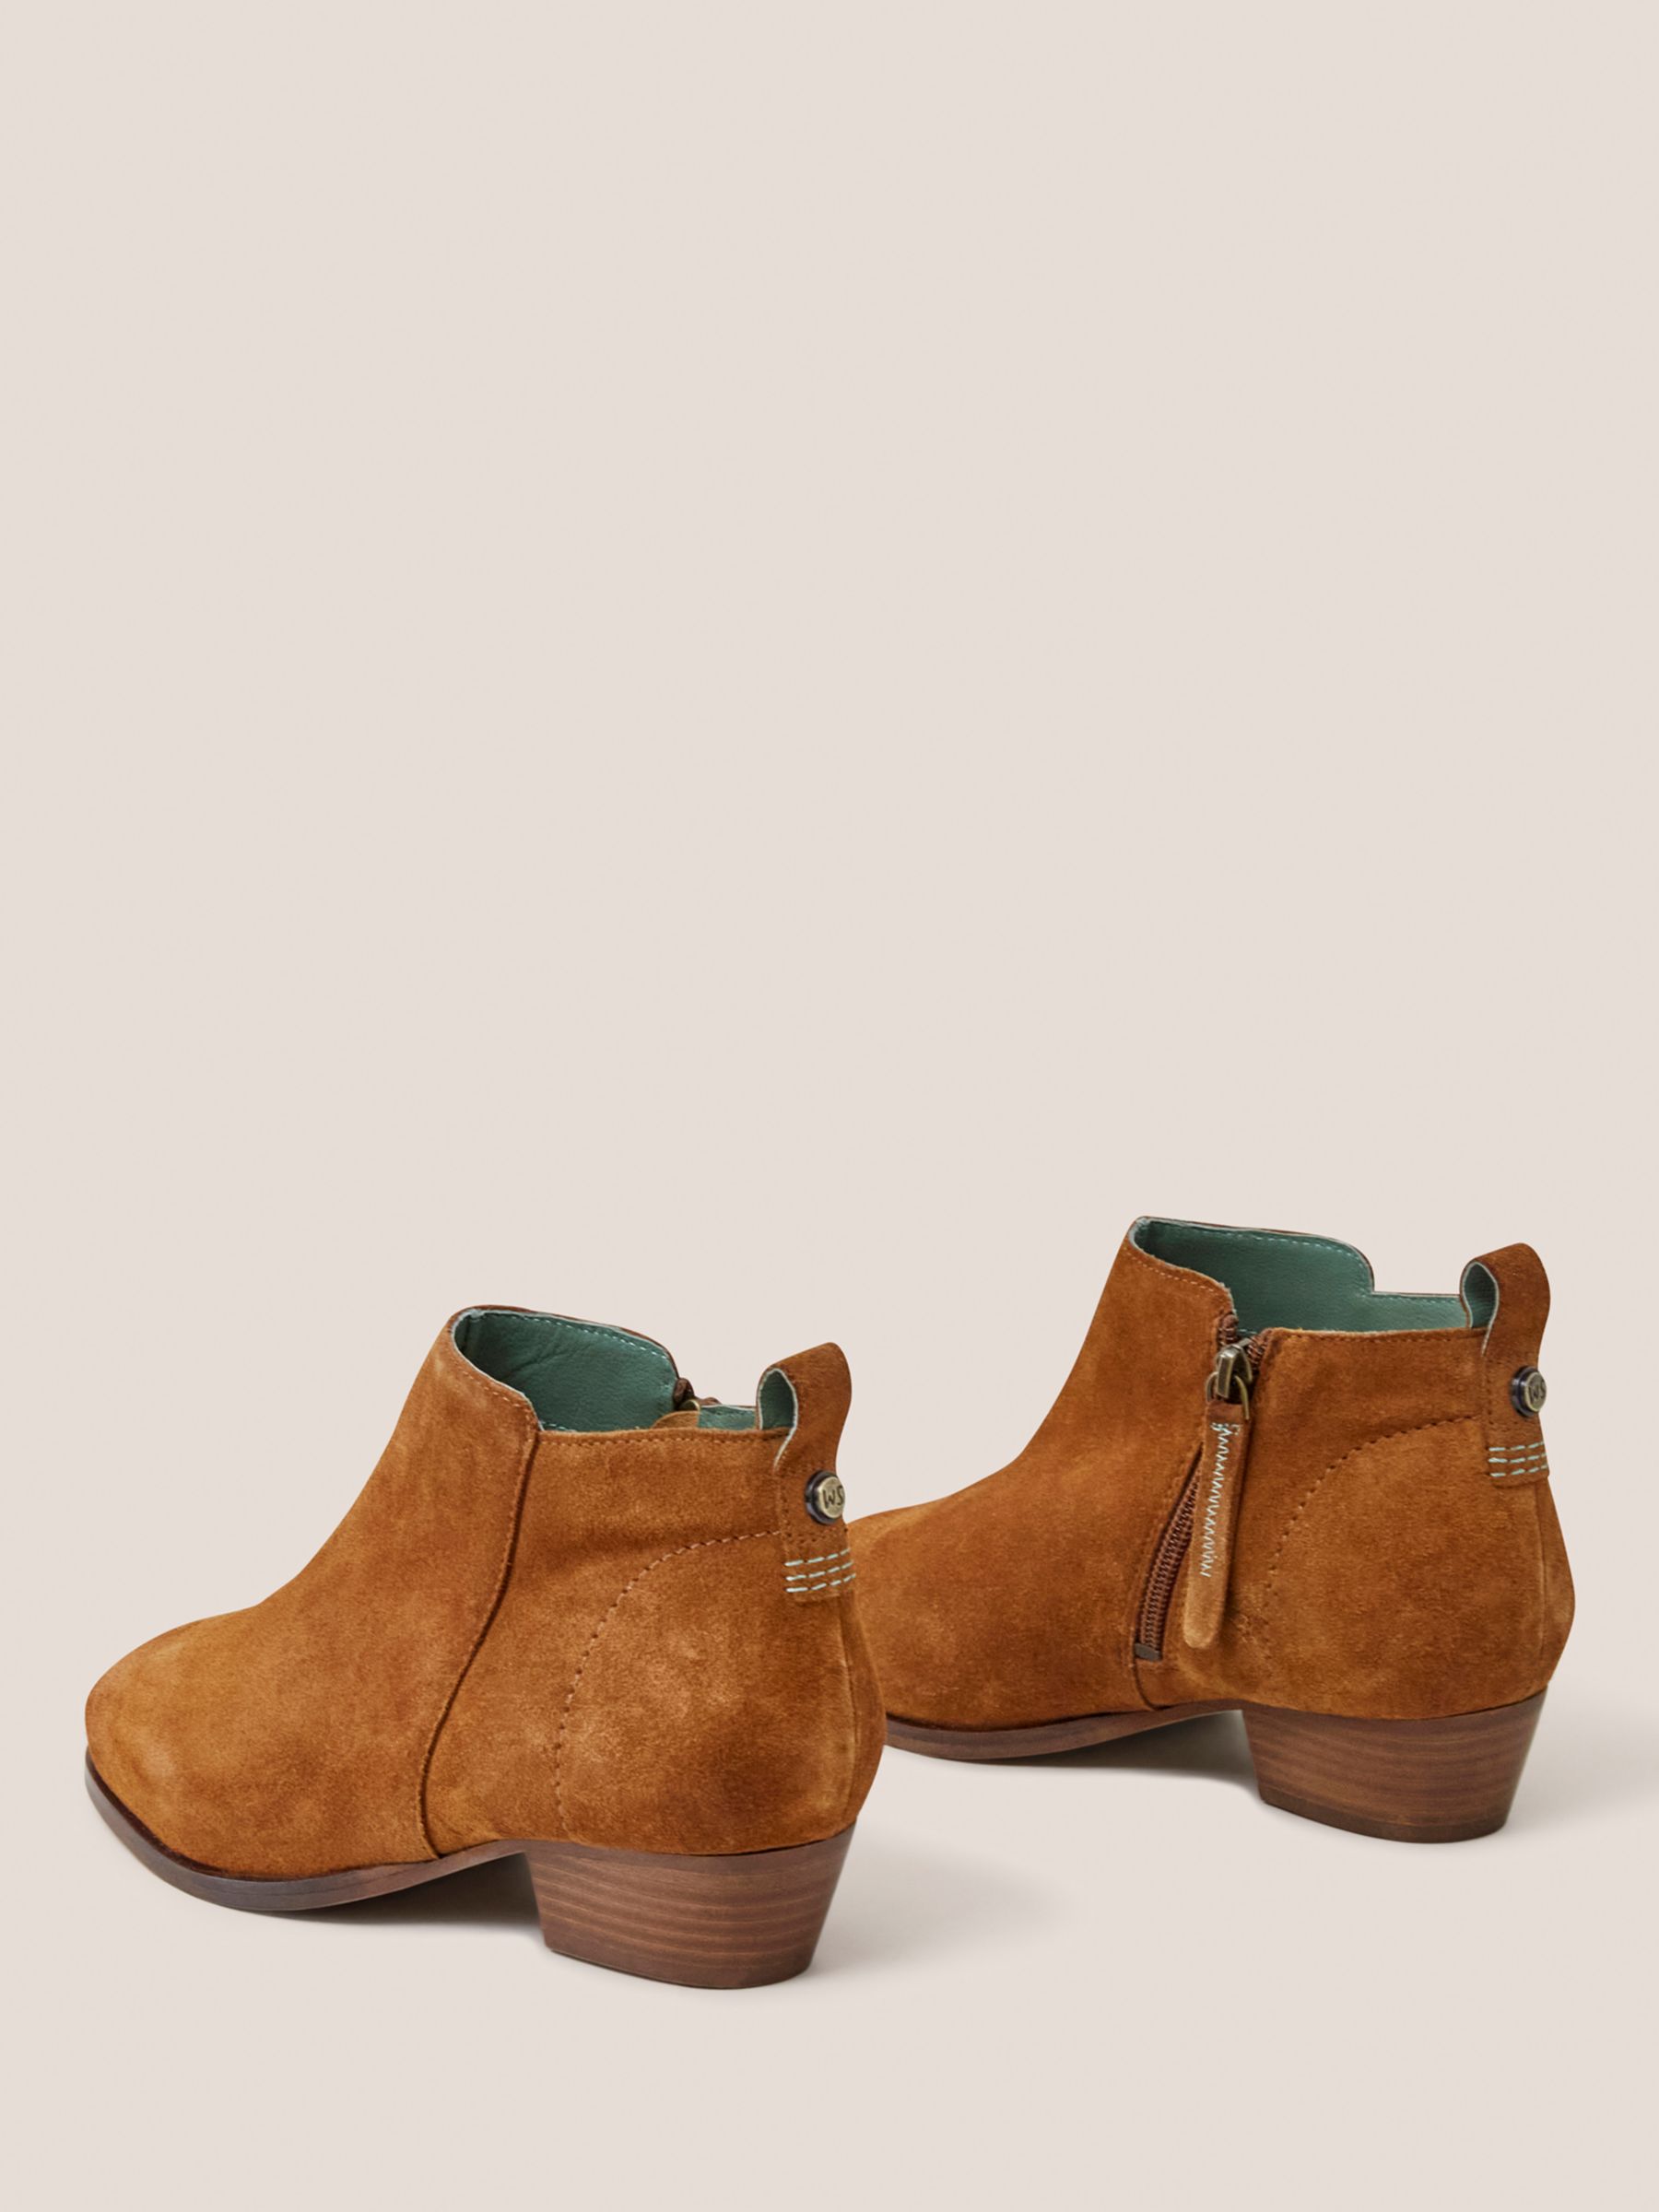 Buy White Stuff Wide Fit Ankle Boots Online at johnlewis.com